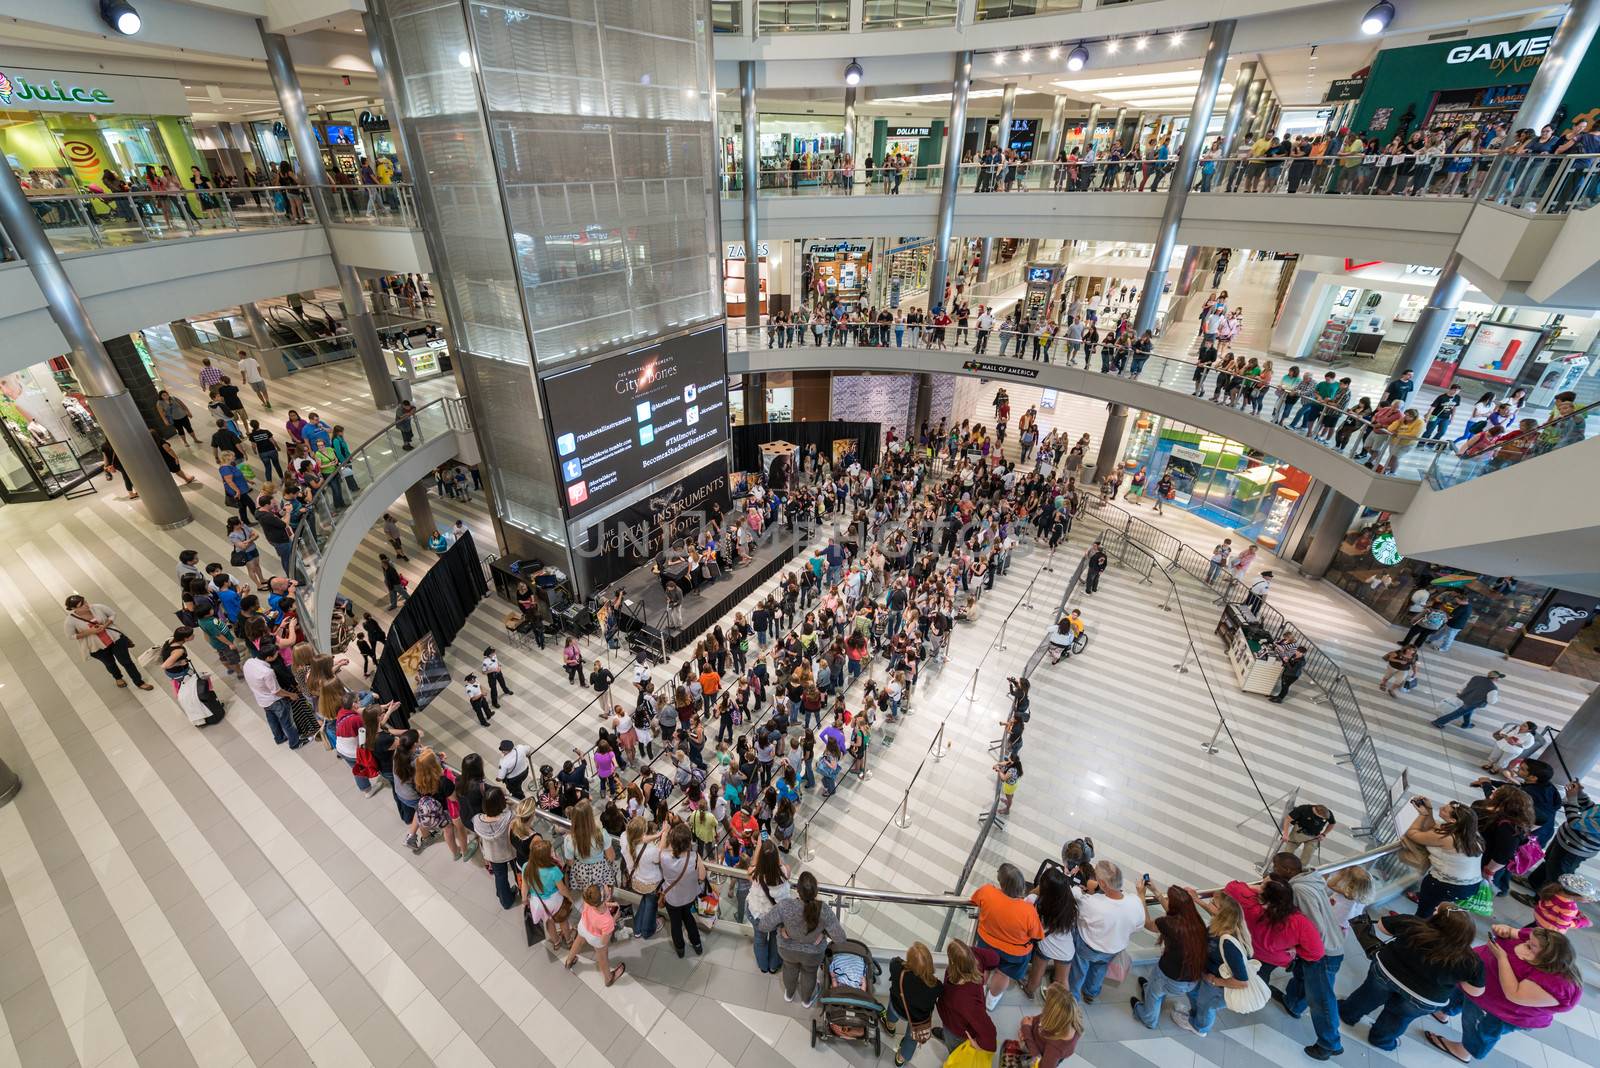 Mall of America during a busy day by IVYPHOTOS